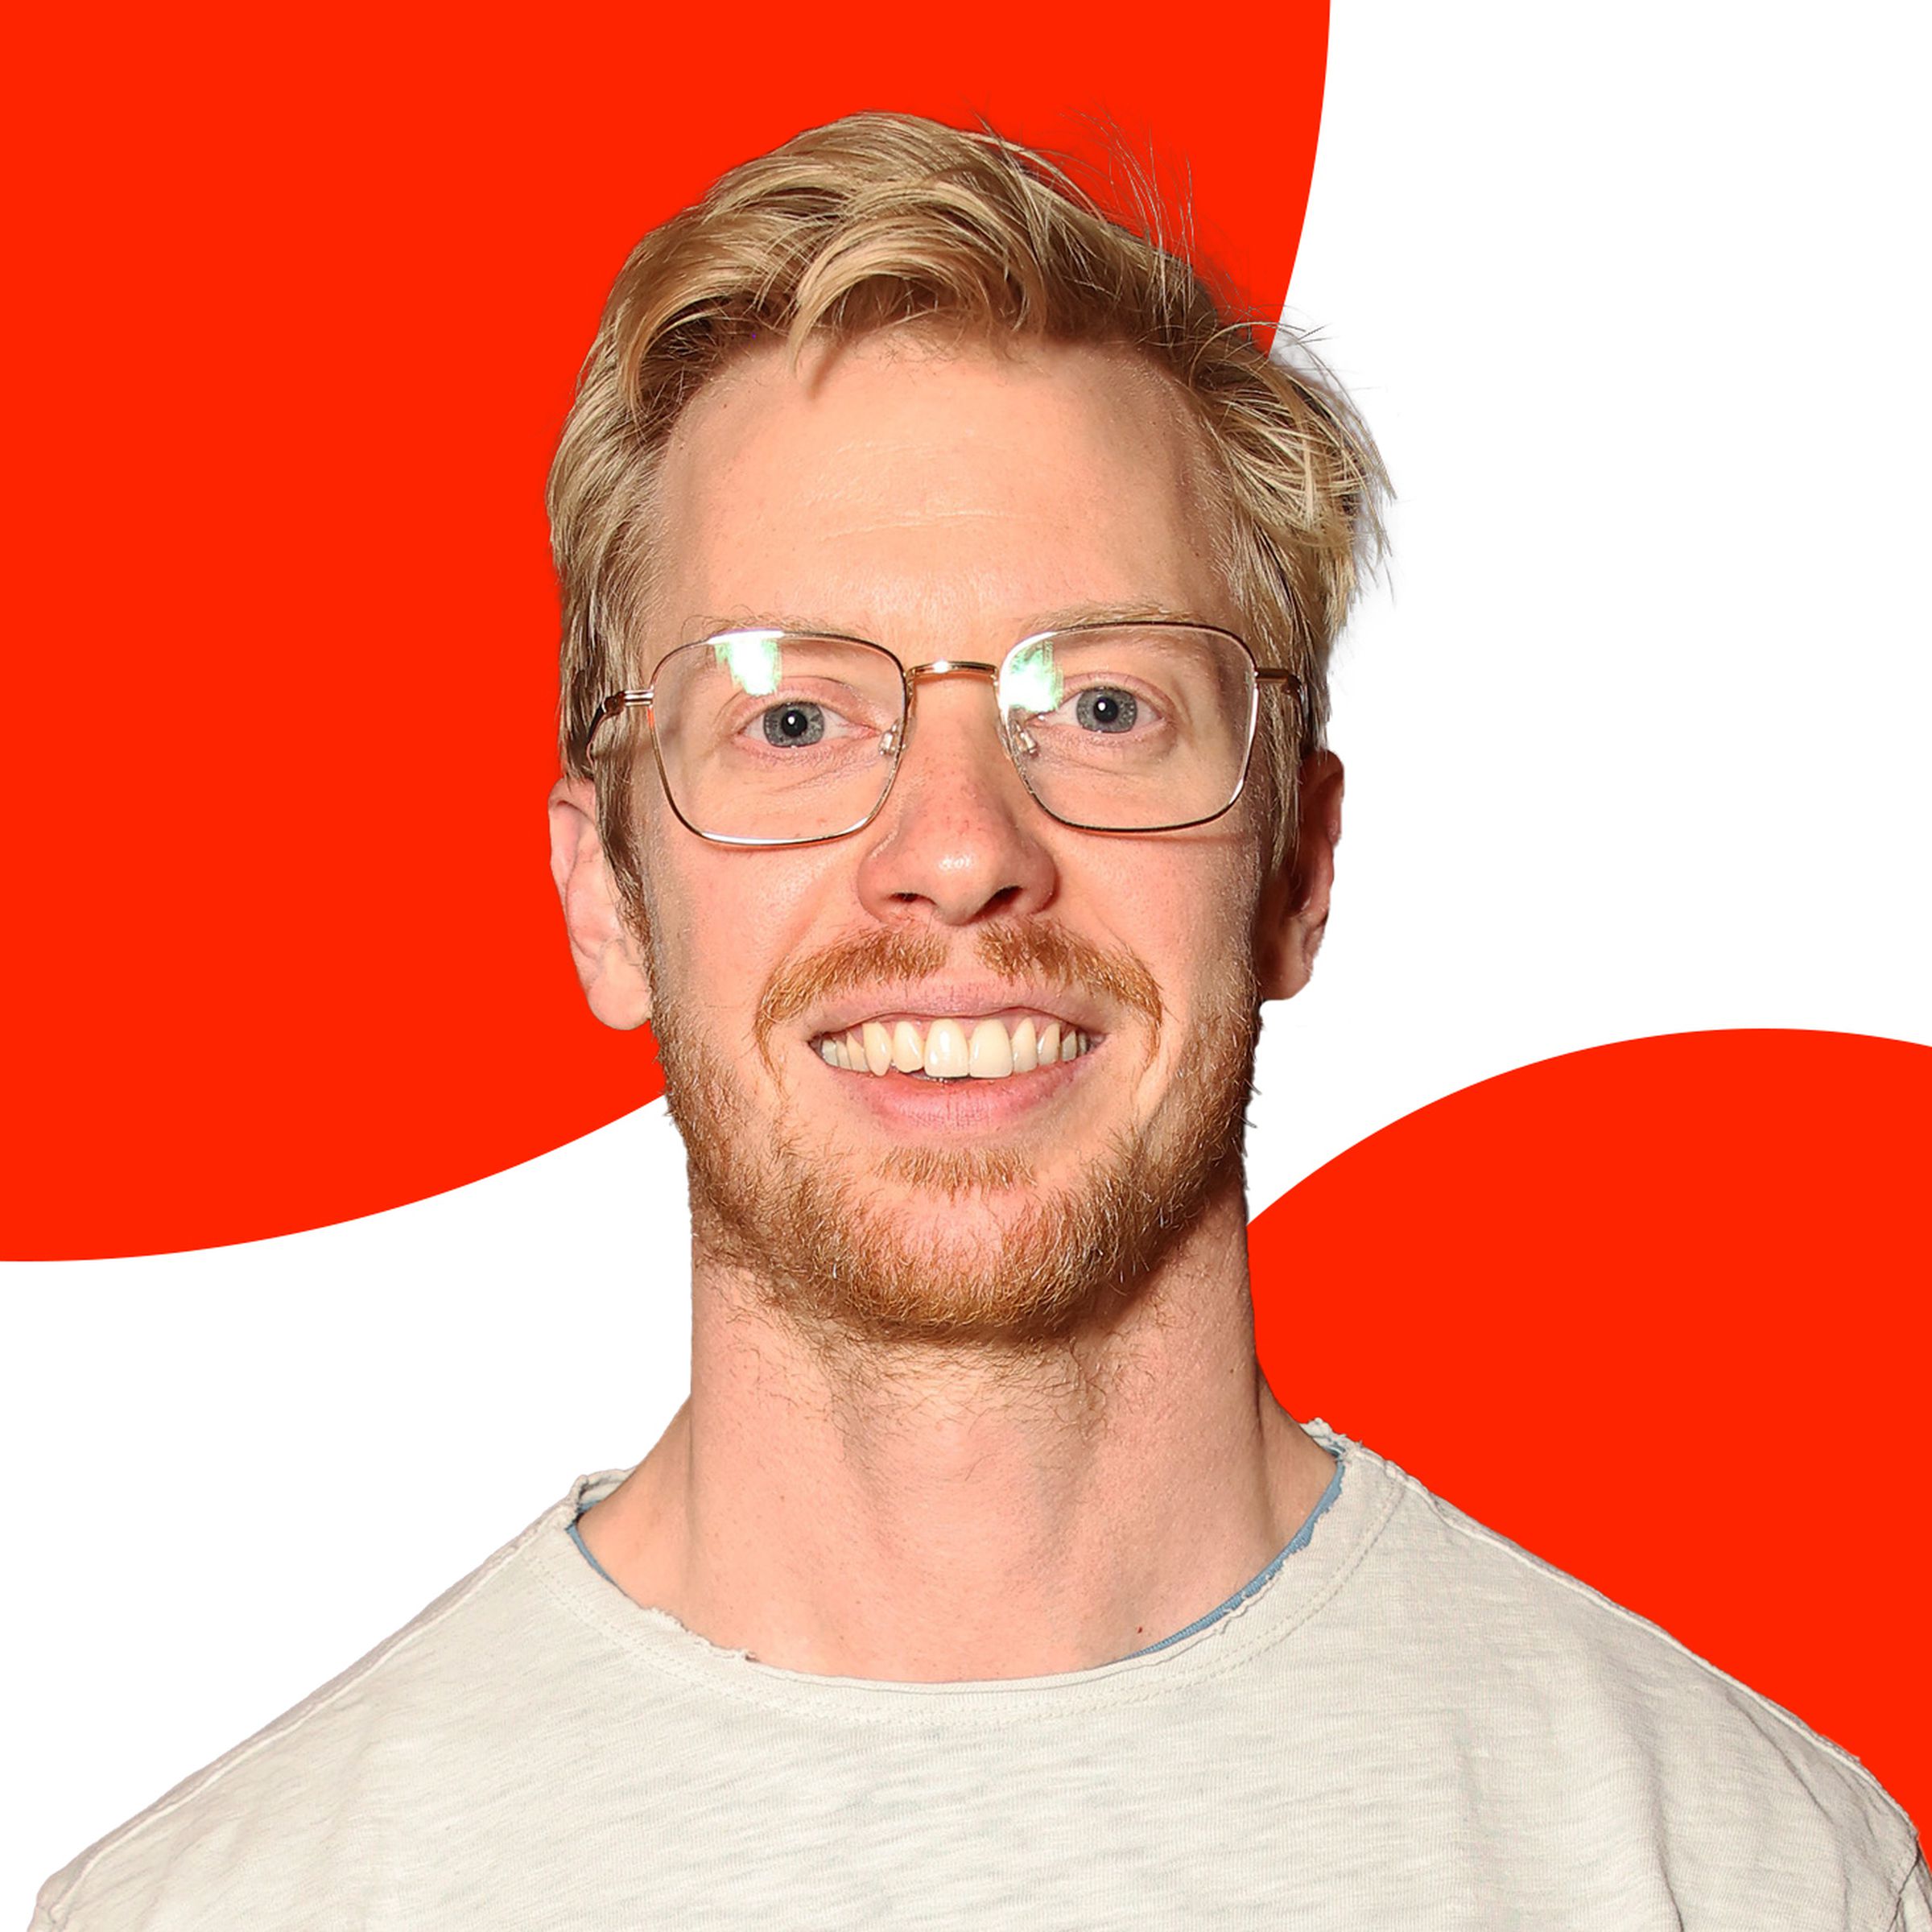 A photo of Reddit CEO Steve Huffman over an orange and white background.